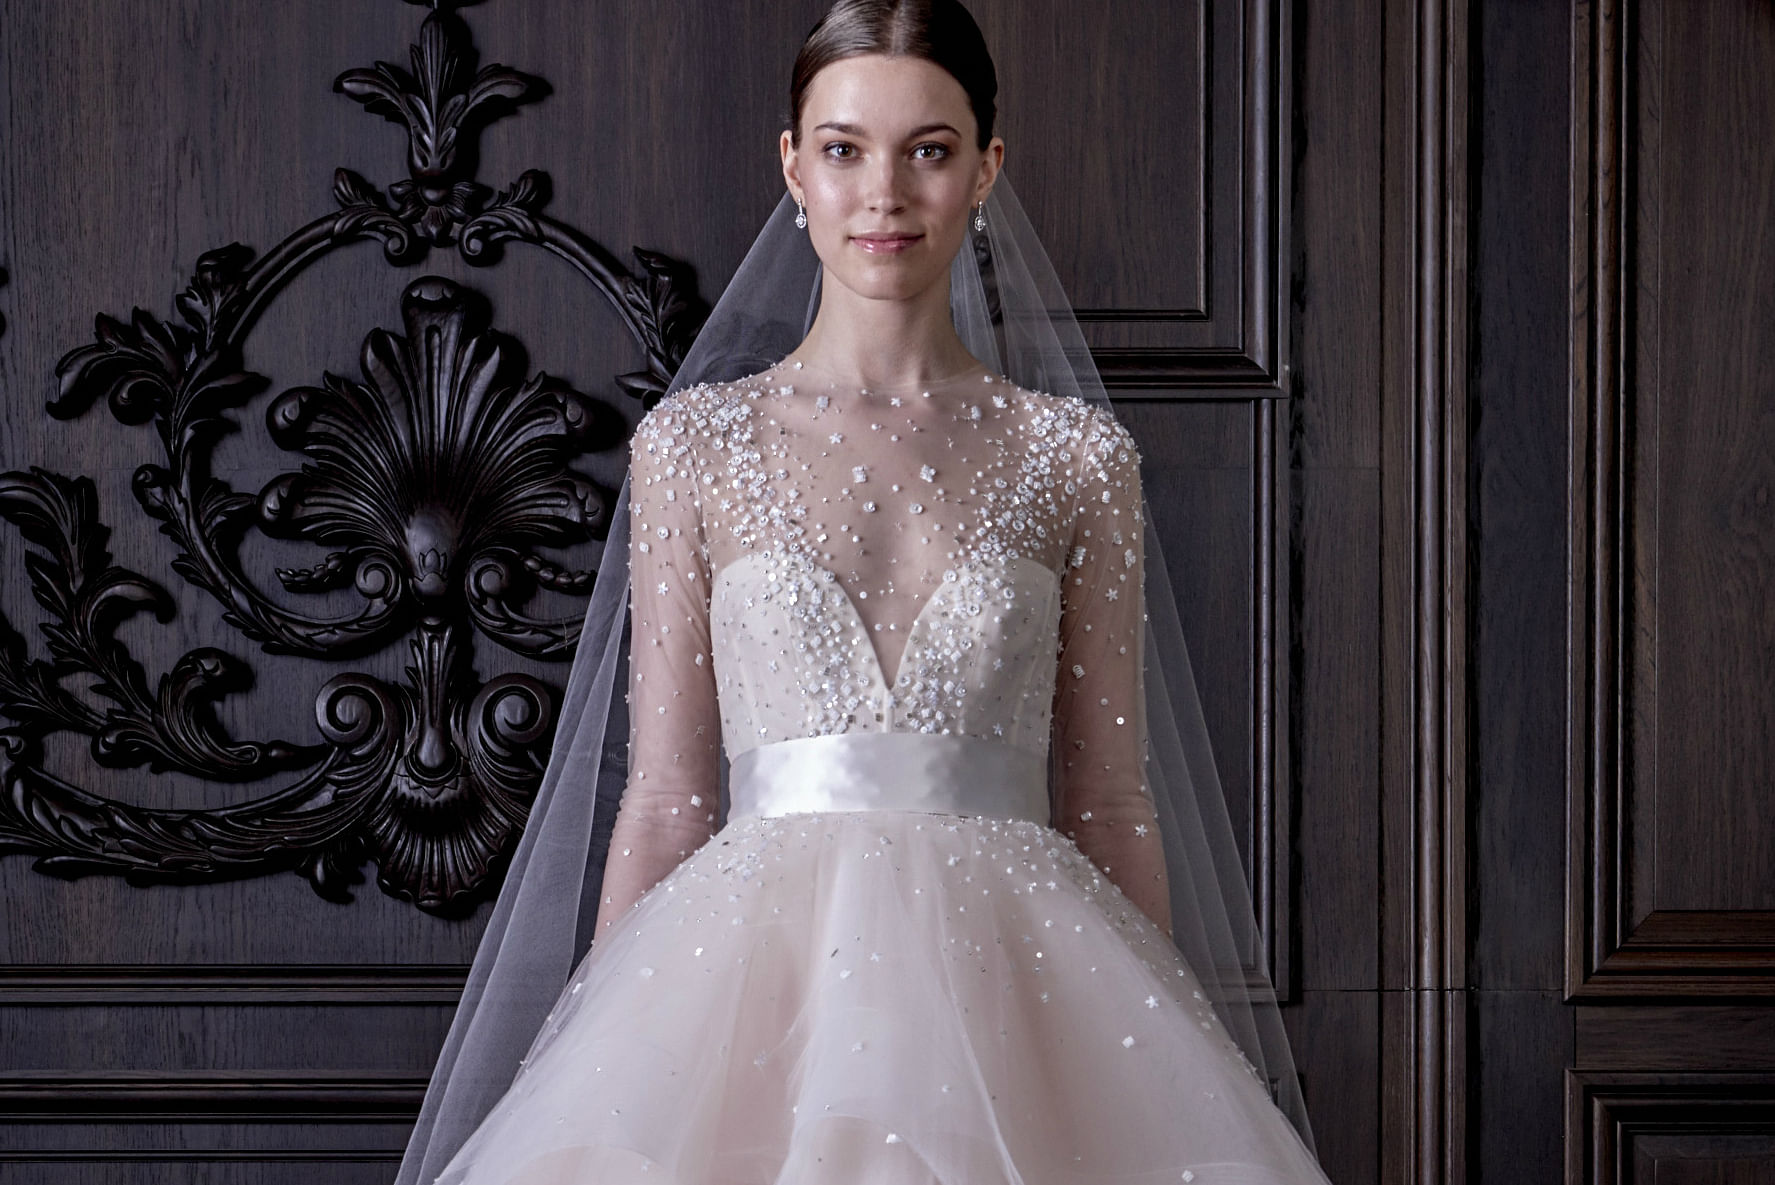 6 Monique Lhuillier wedding dresses we love from the SS16 collection ...